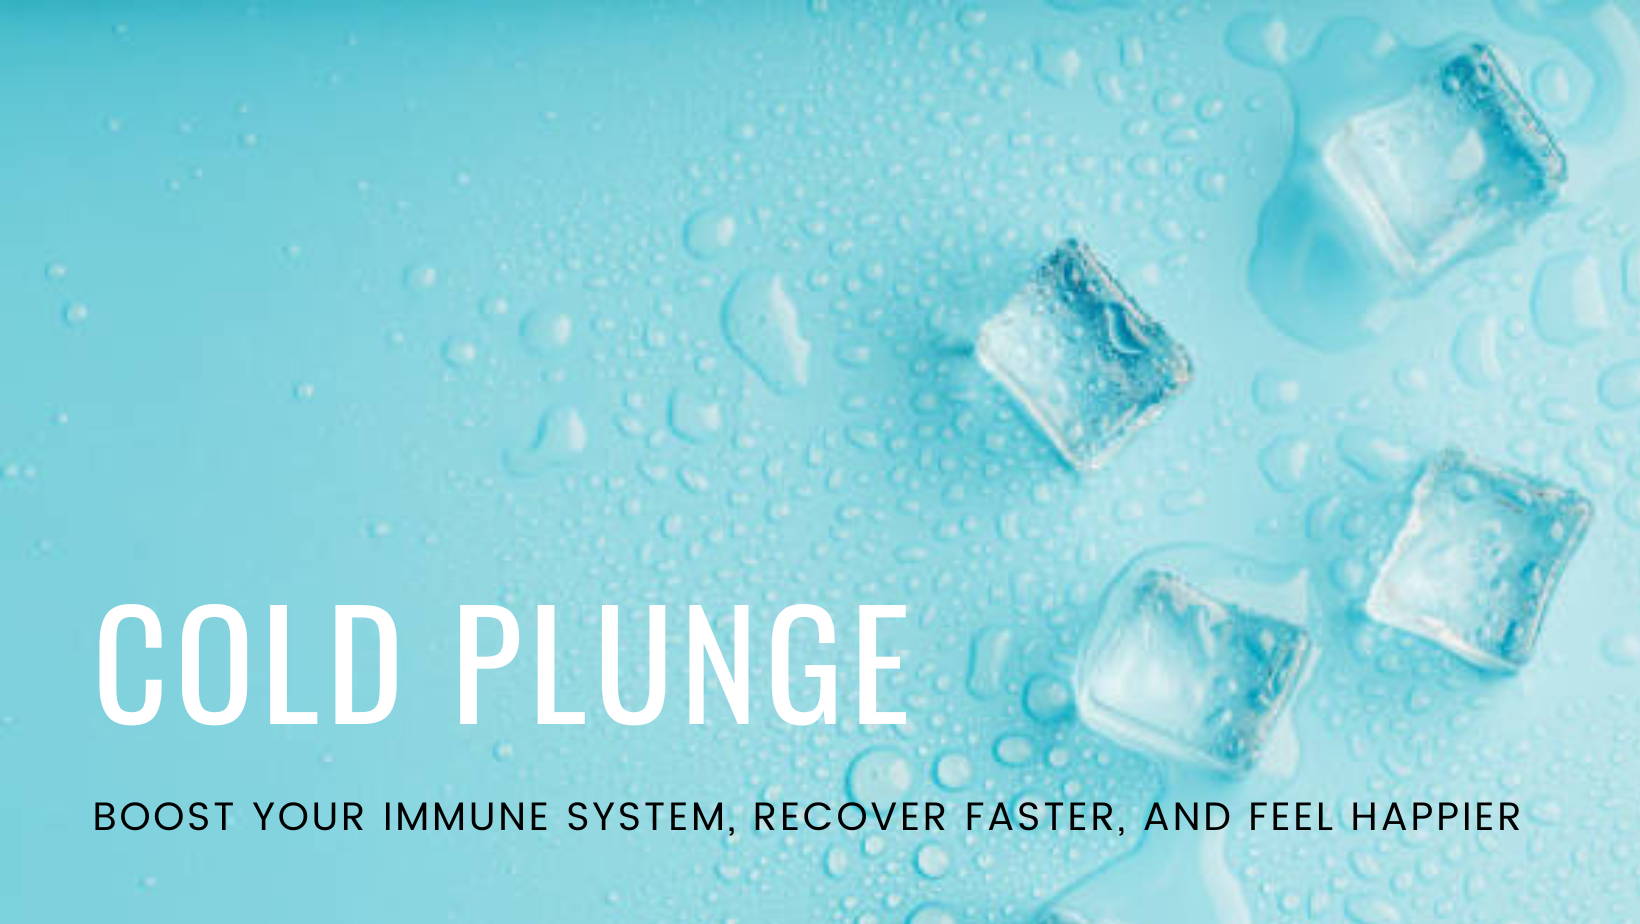 Cold Plunge: Boost Your Immune System, Recover Faster, and Feel Happier